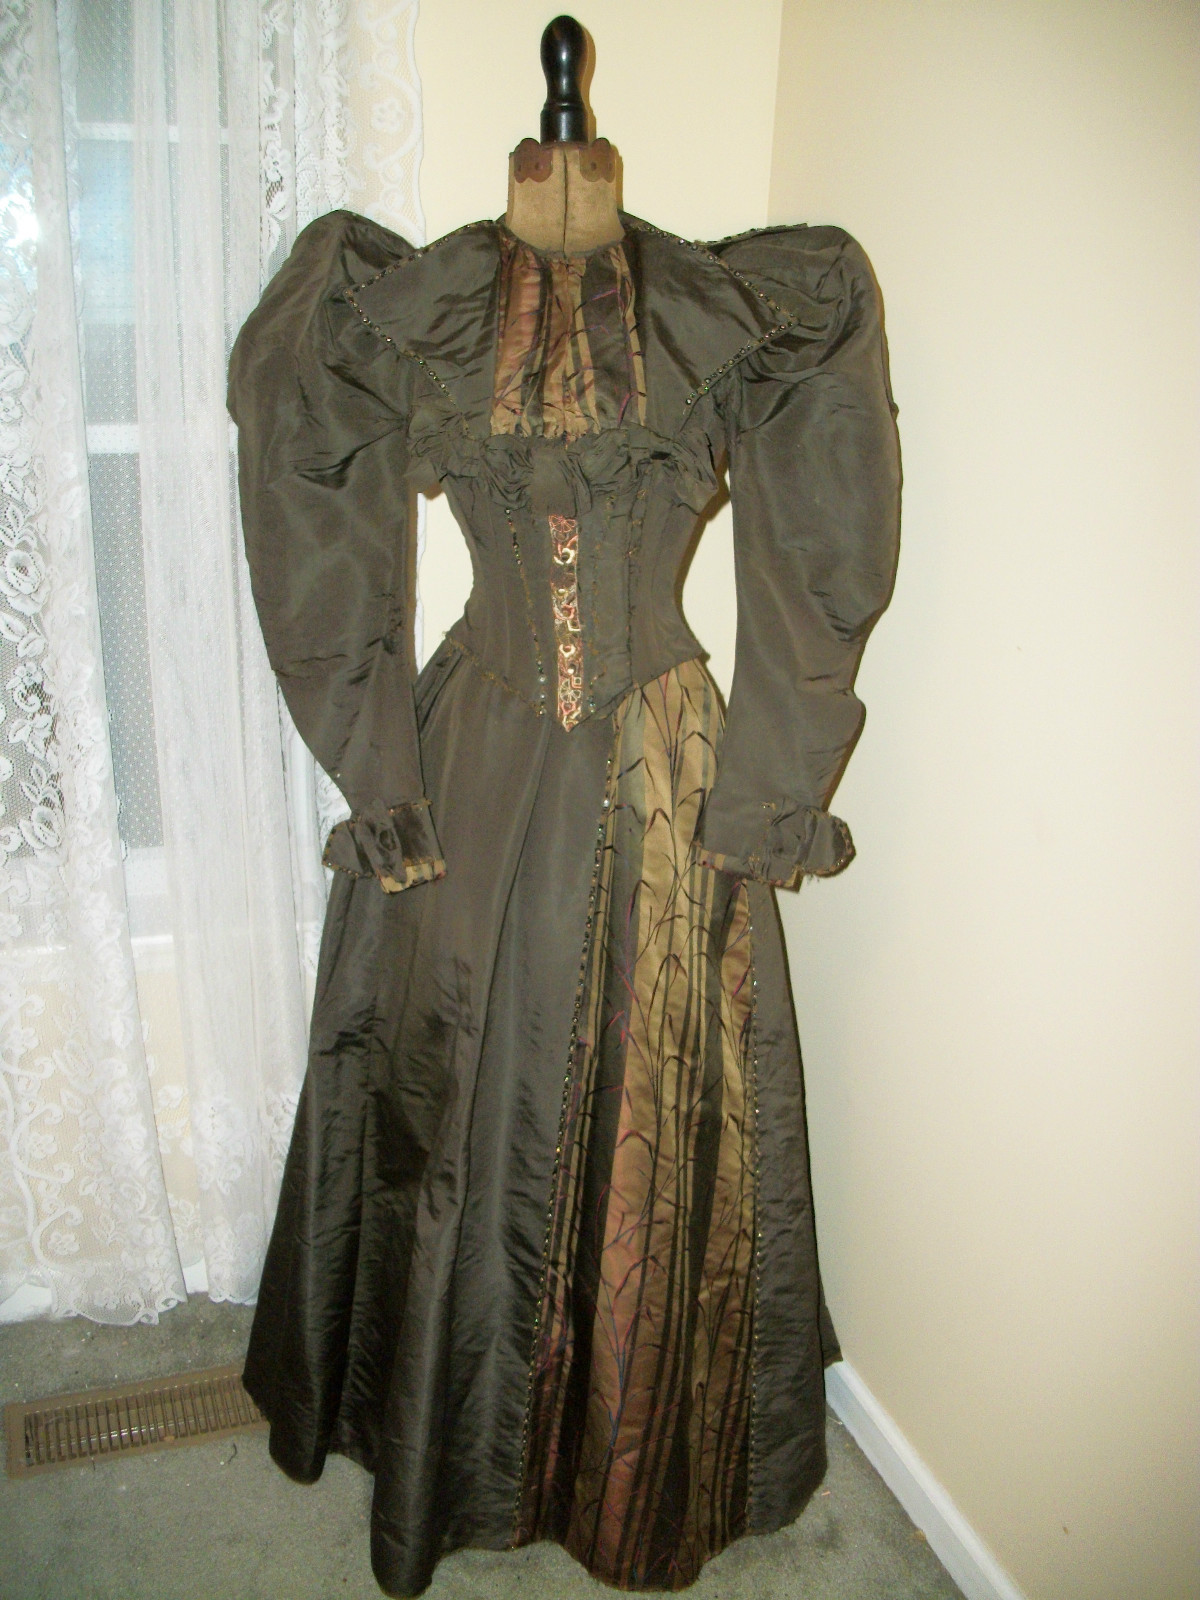 All The Pretty Dresses: 1890's Outfit with amazing fabric